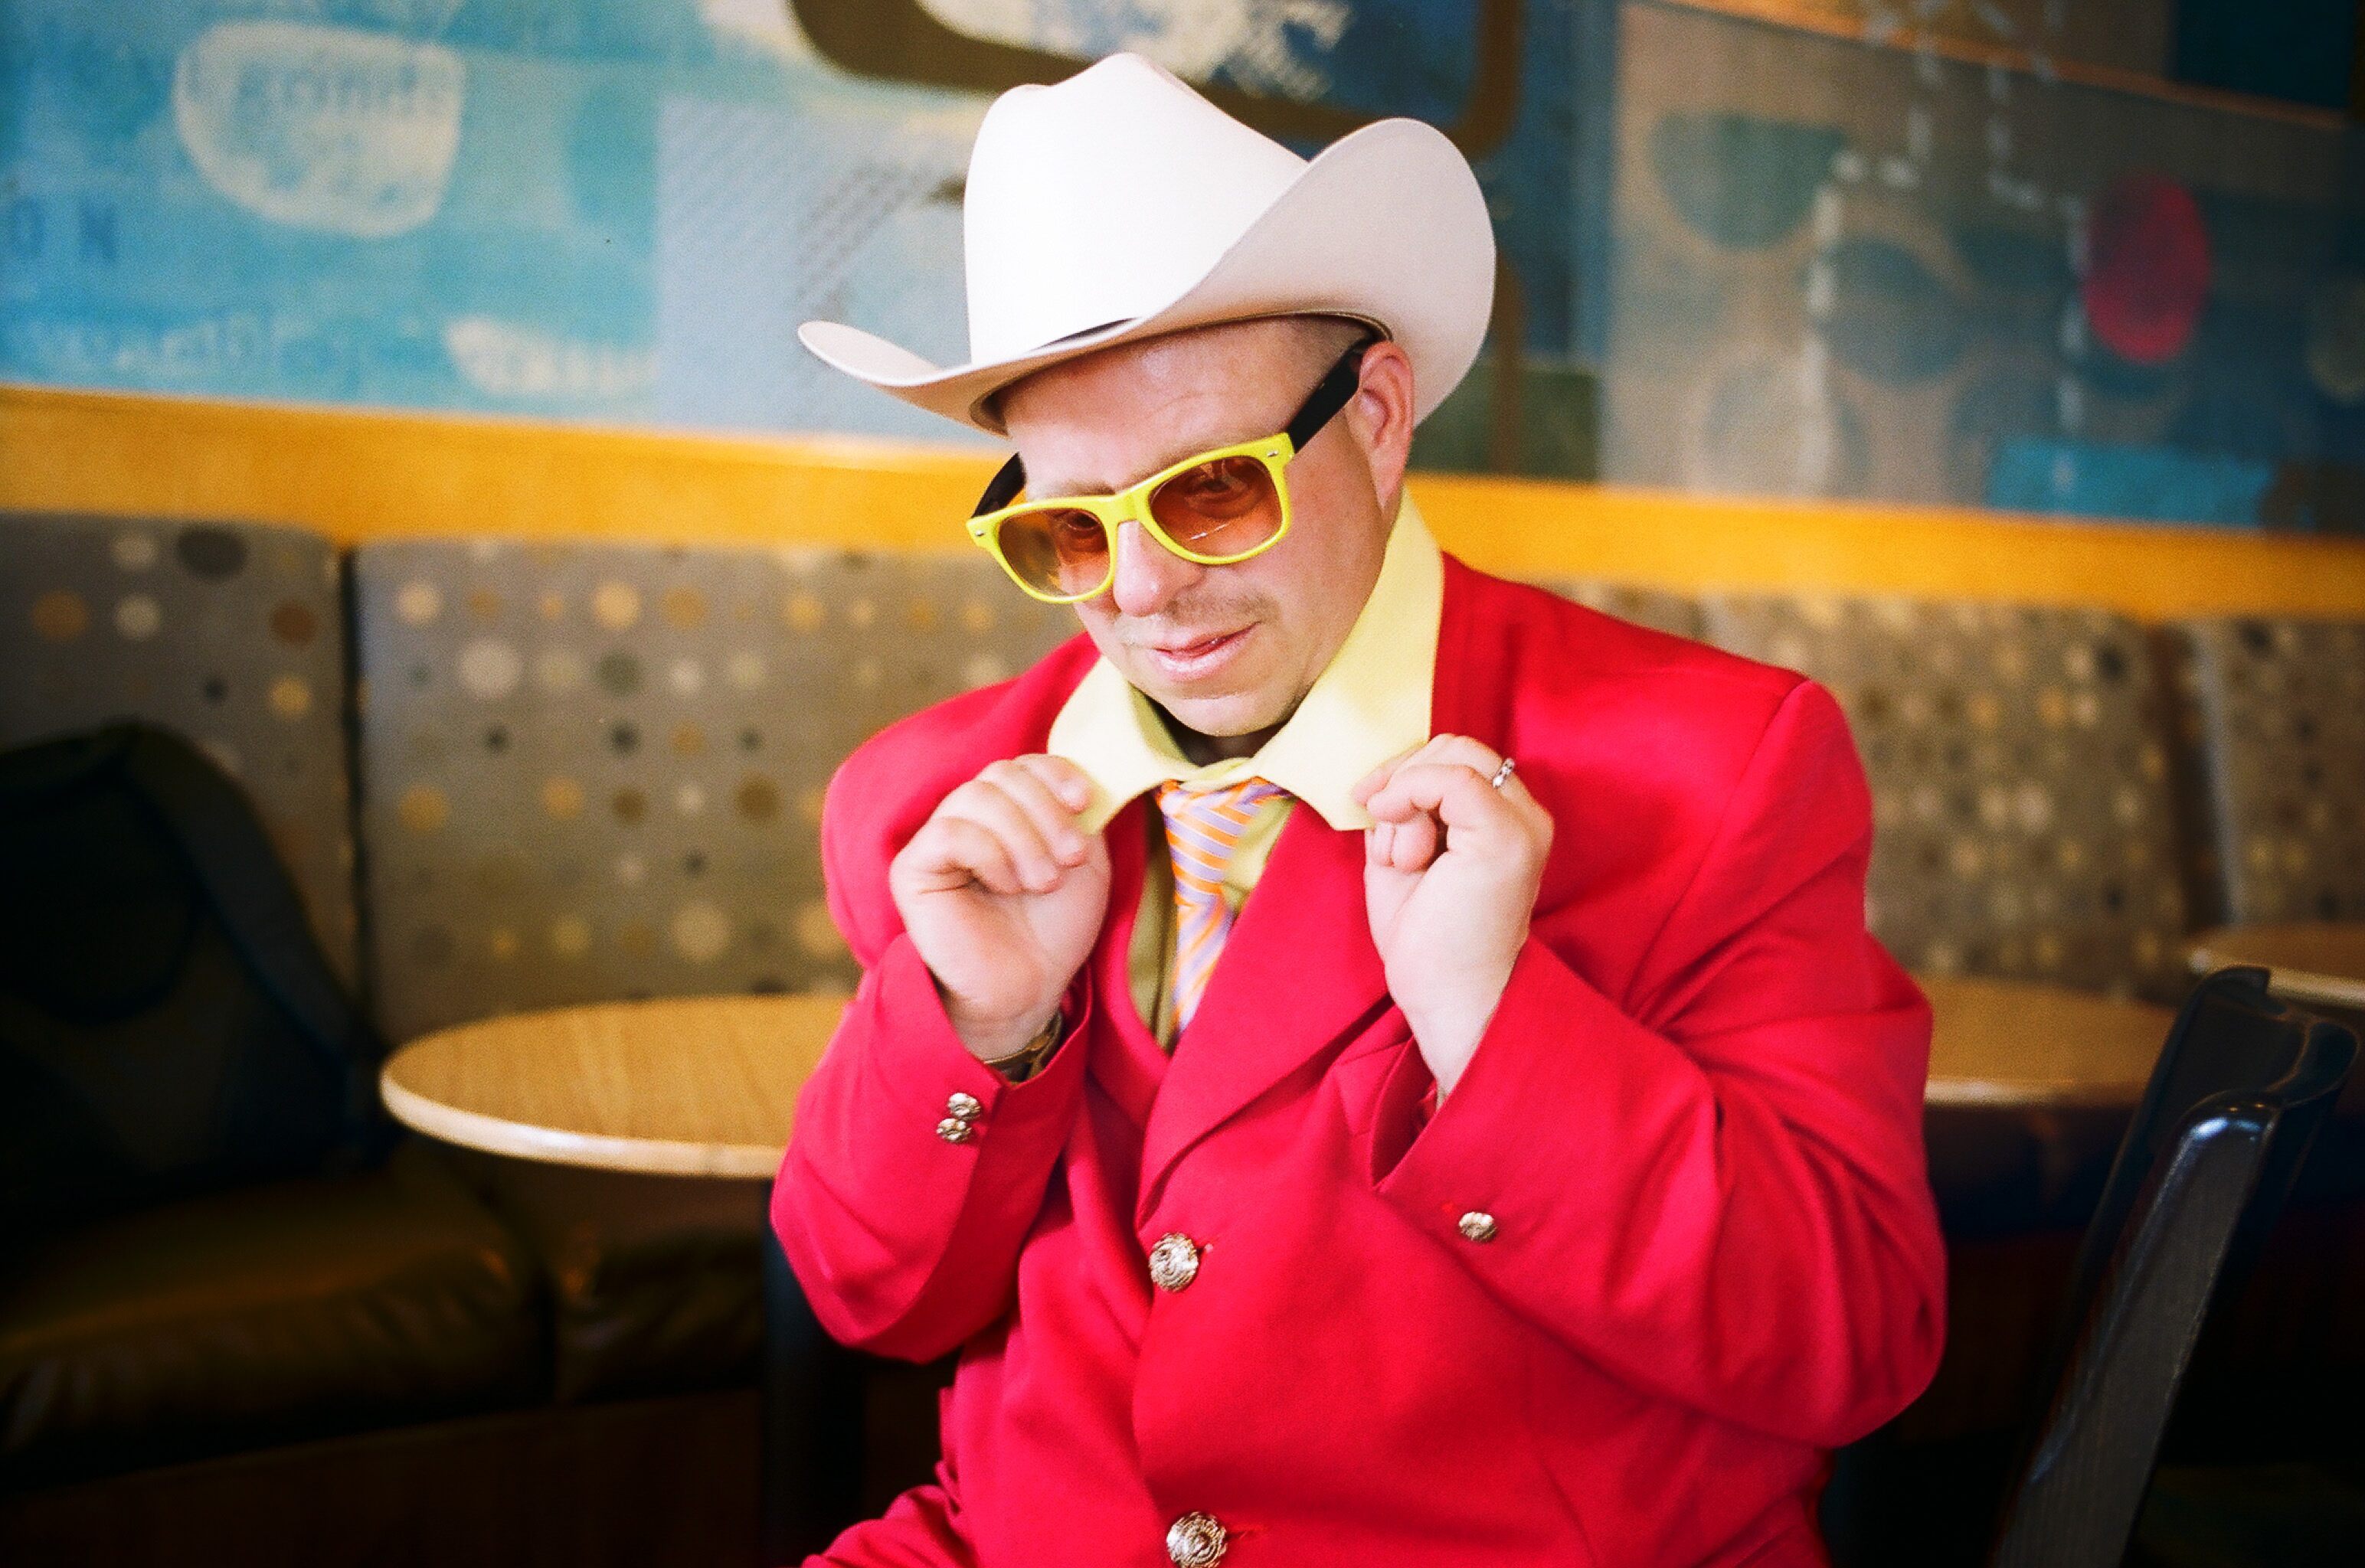 Red cowboy. Red, yellow, blue. Los Angeles, 2013. Street photograph by Eric Kim.